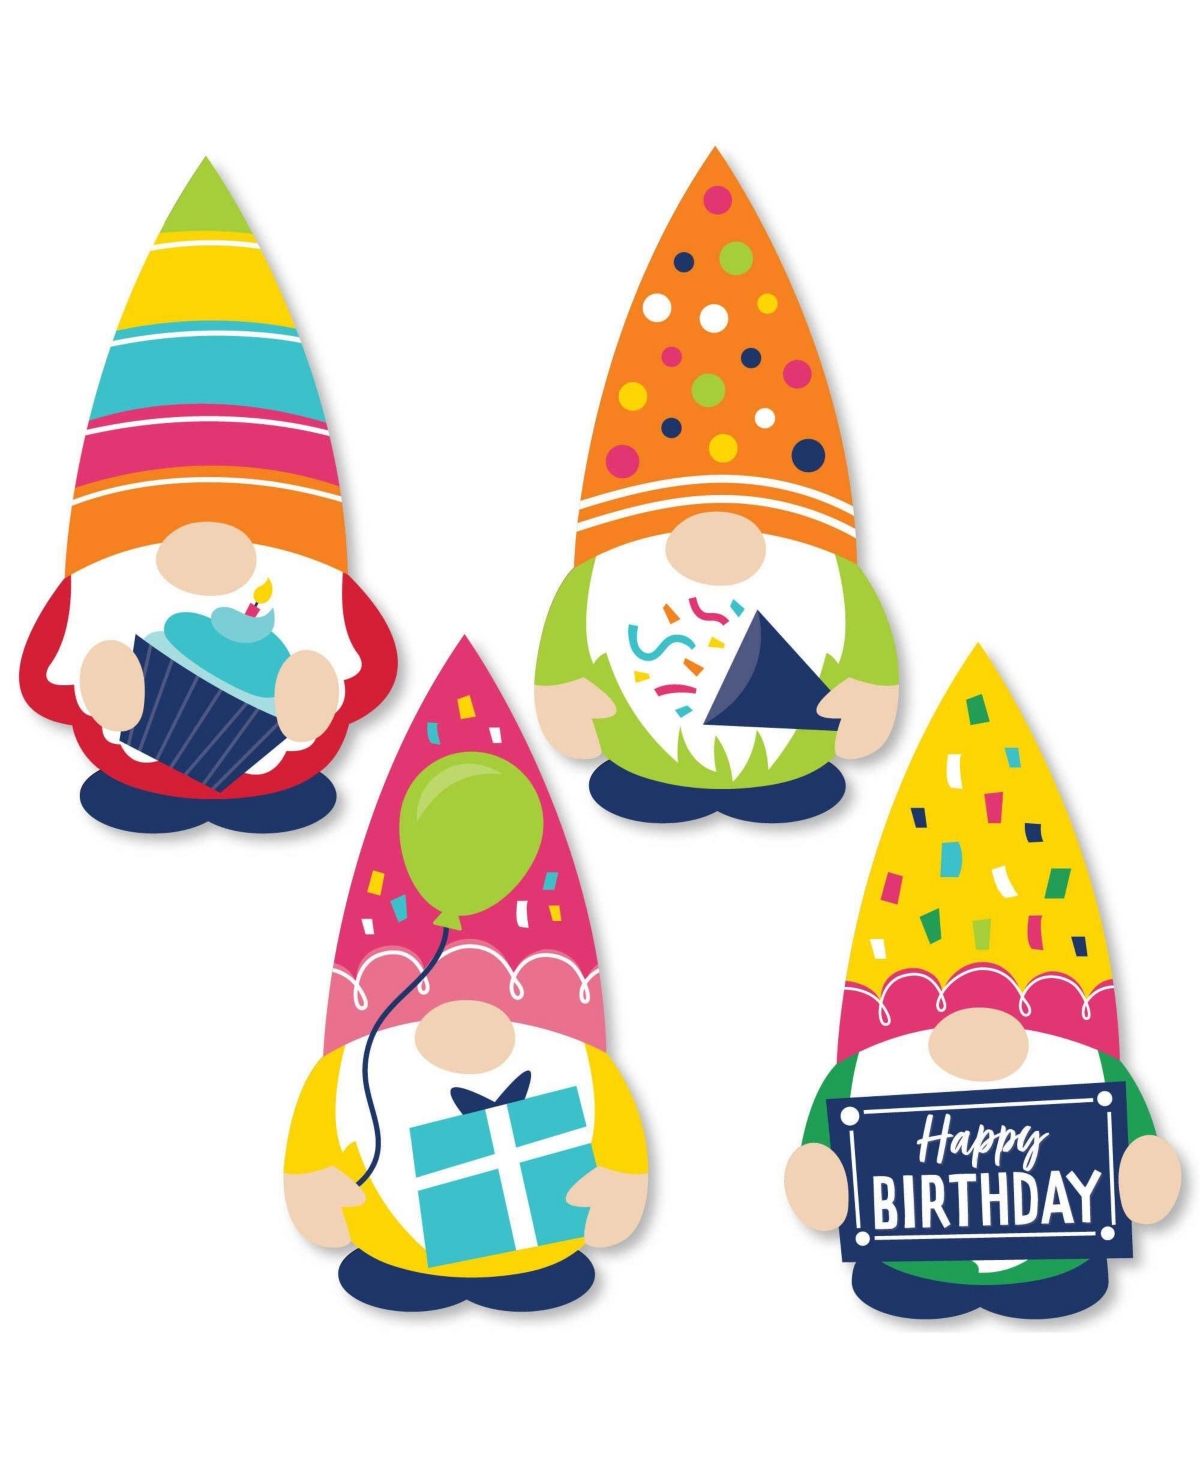 Gnome Birthday - Diy Shaped Happy Birthday Party Cut-Outs - 24 Ct